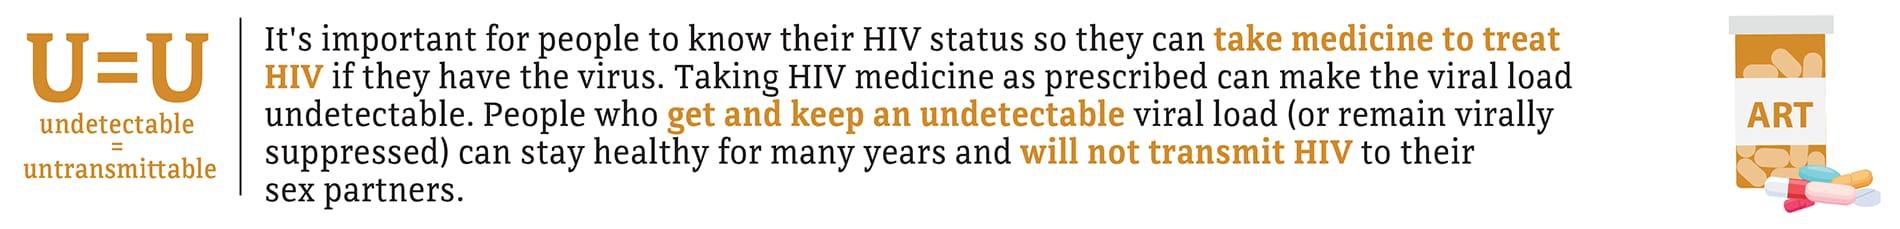 Taking HIV medicine as prescribed can make the viral load undetectable. People who get and keep an undetectable viral load can stay healthy for many years and will not transmit HIV to their sex partners.